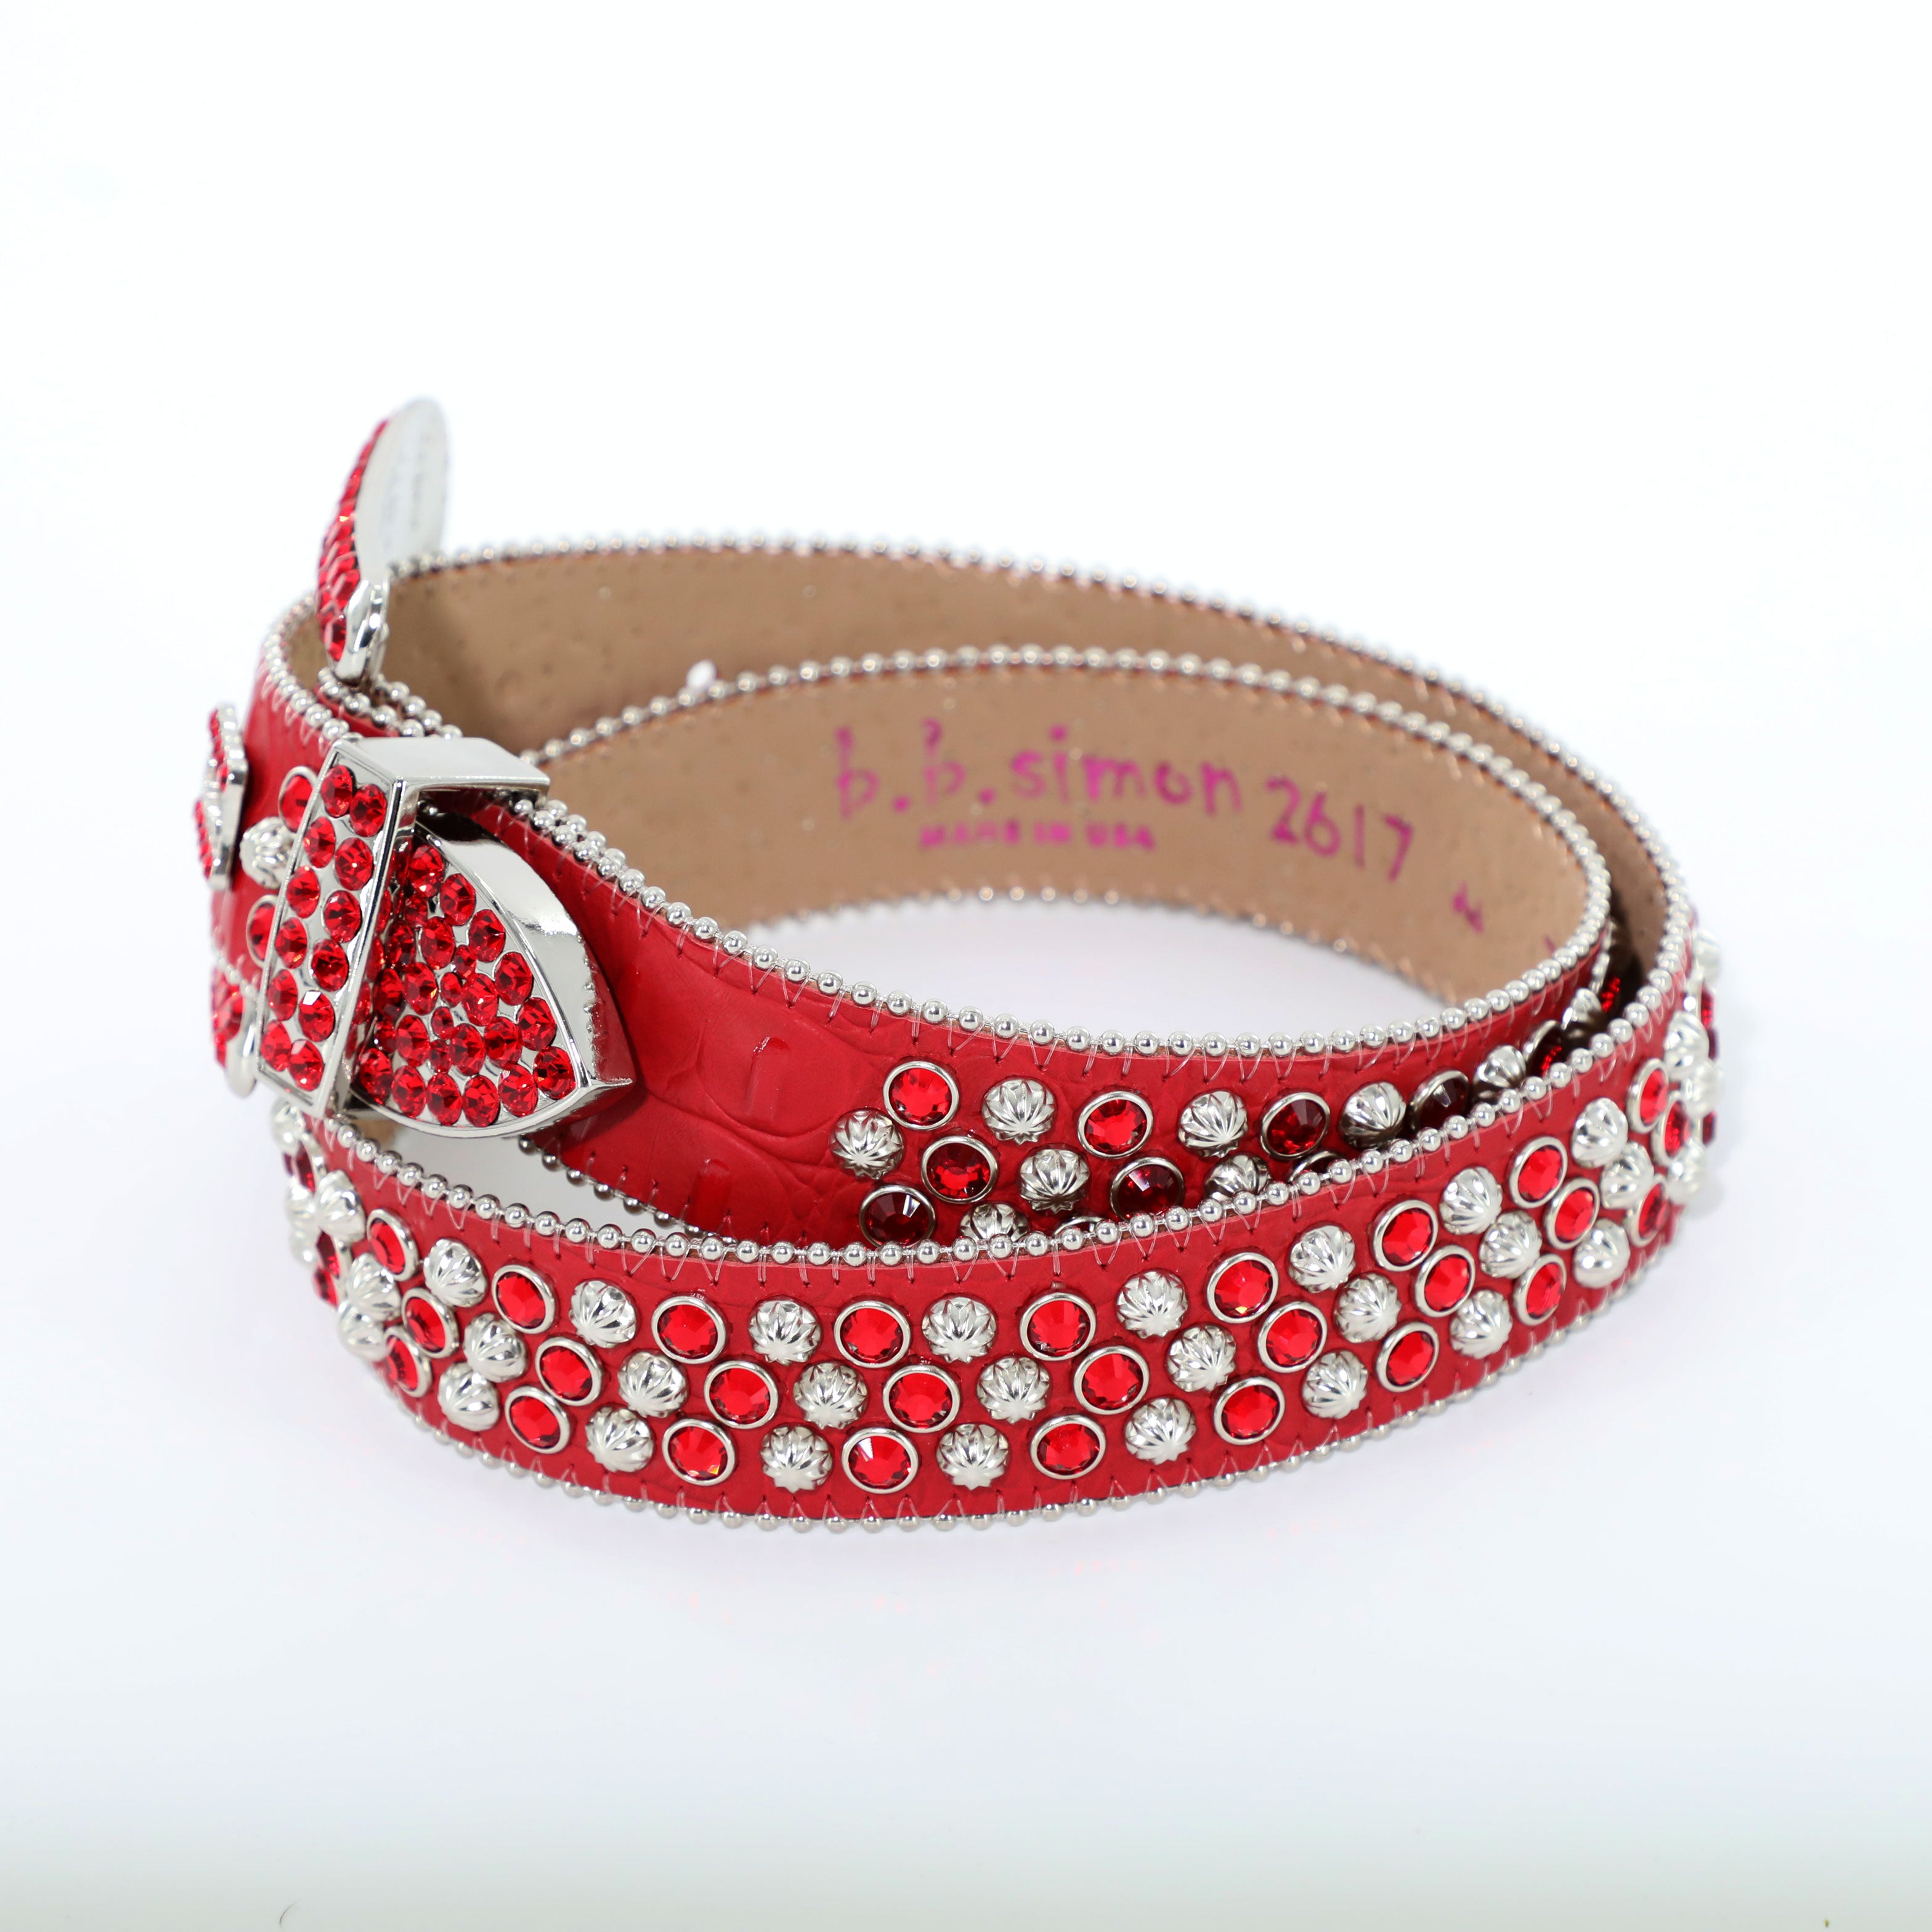 B.B Simon Red Belt w/ All Silver Crystals and Parachute Studs Red / 36